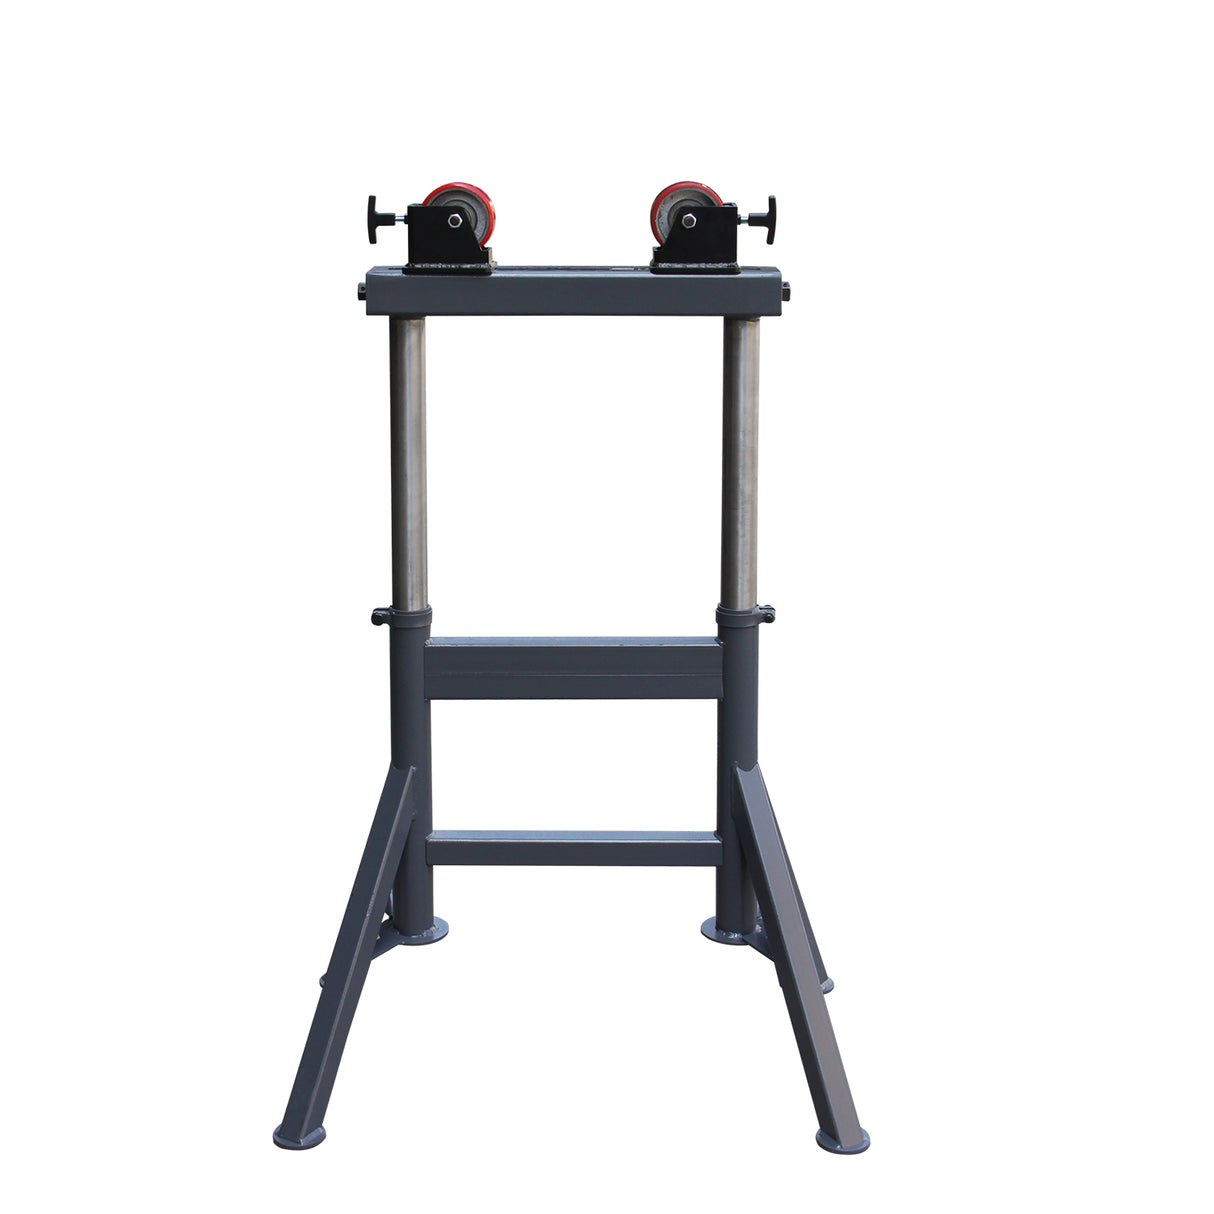 Kang Industrial PTR-1090A Pipe Stands, Pipe Welding Tools & Equipment, Height Adjustable Pipe Roller Stand